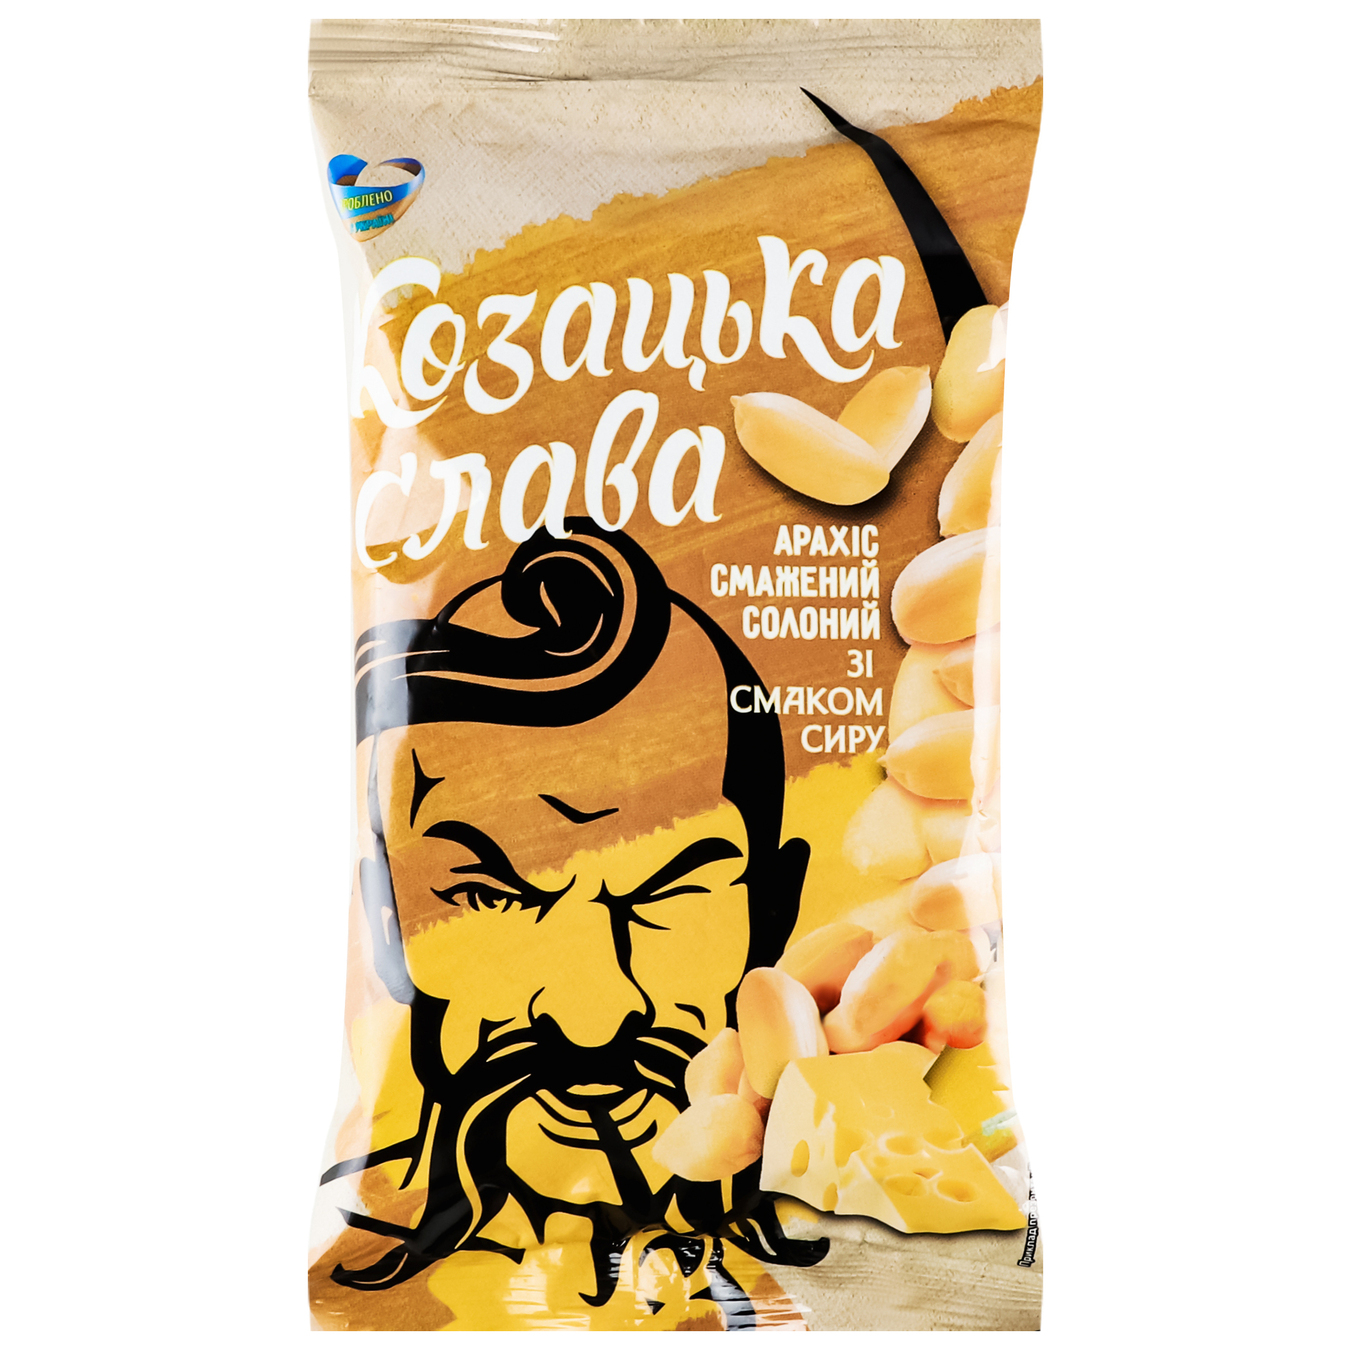 Peanuts Cossack glory fried salty cheese 110g